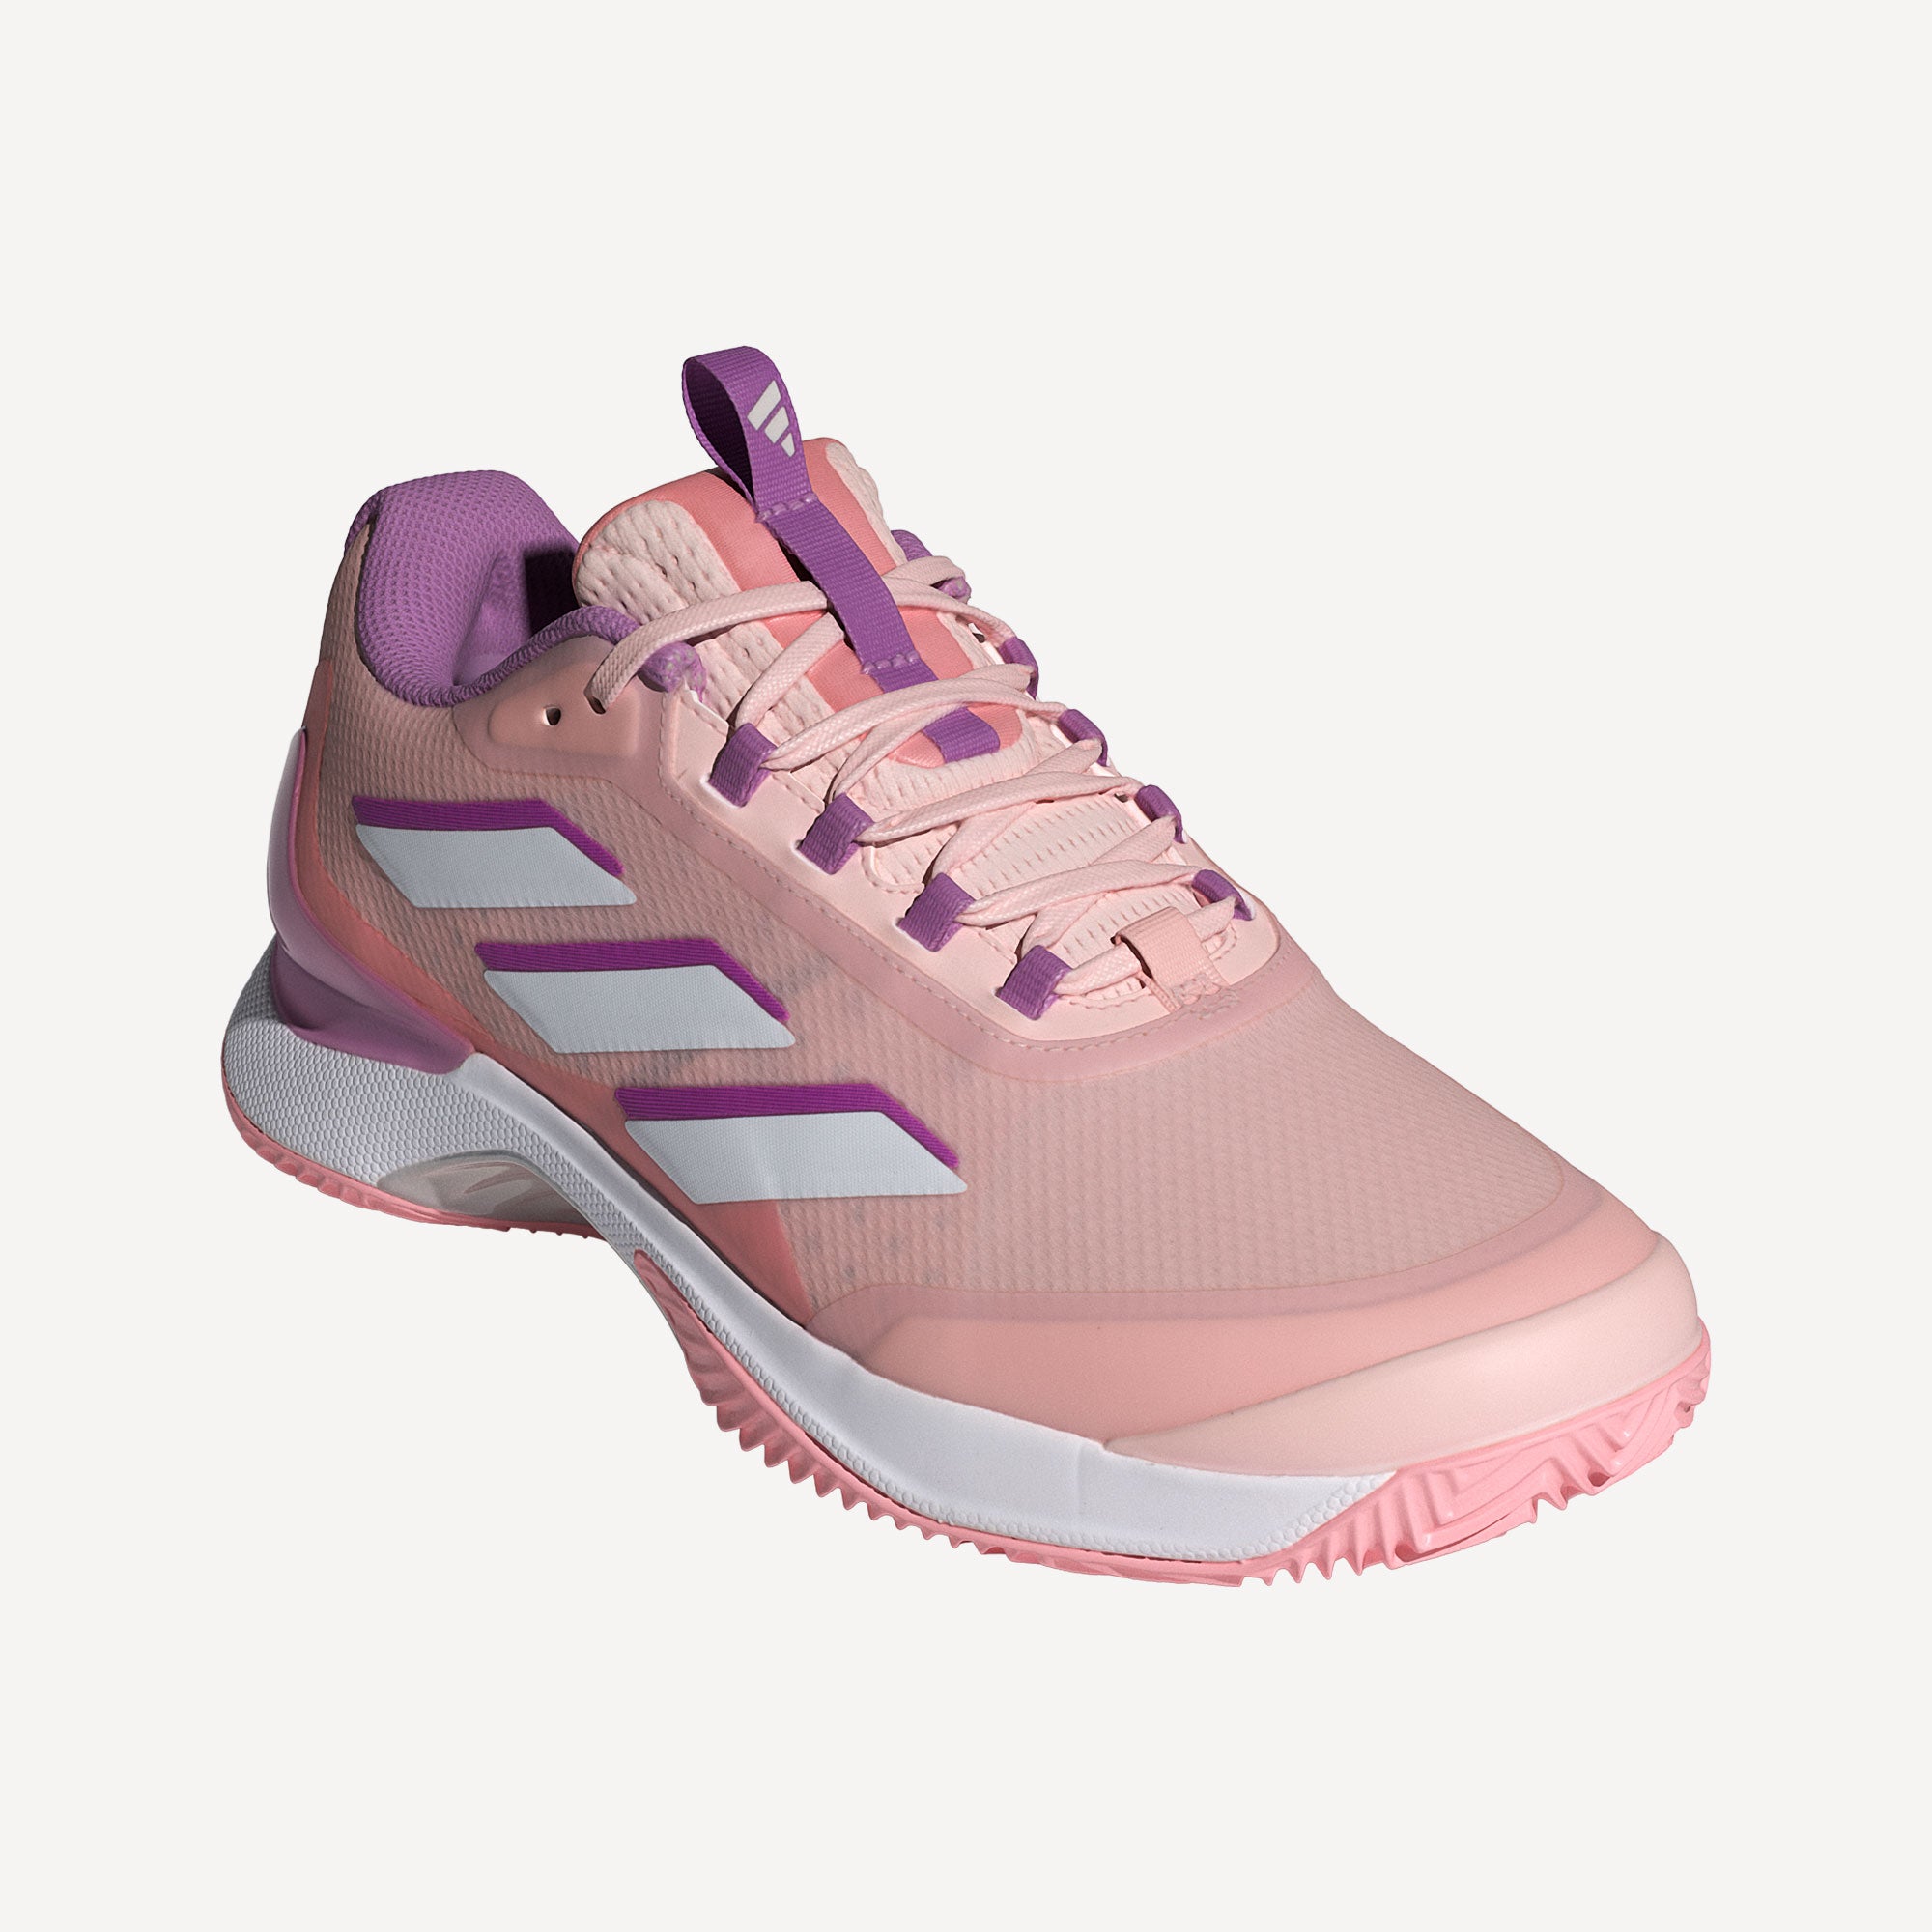 adidas Avacourt 2 Women's Clay Court Tennis Shoes - Pink (5)